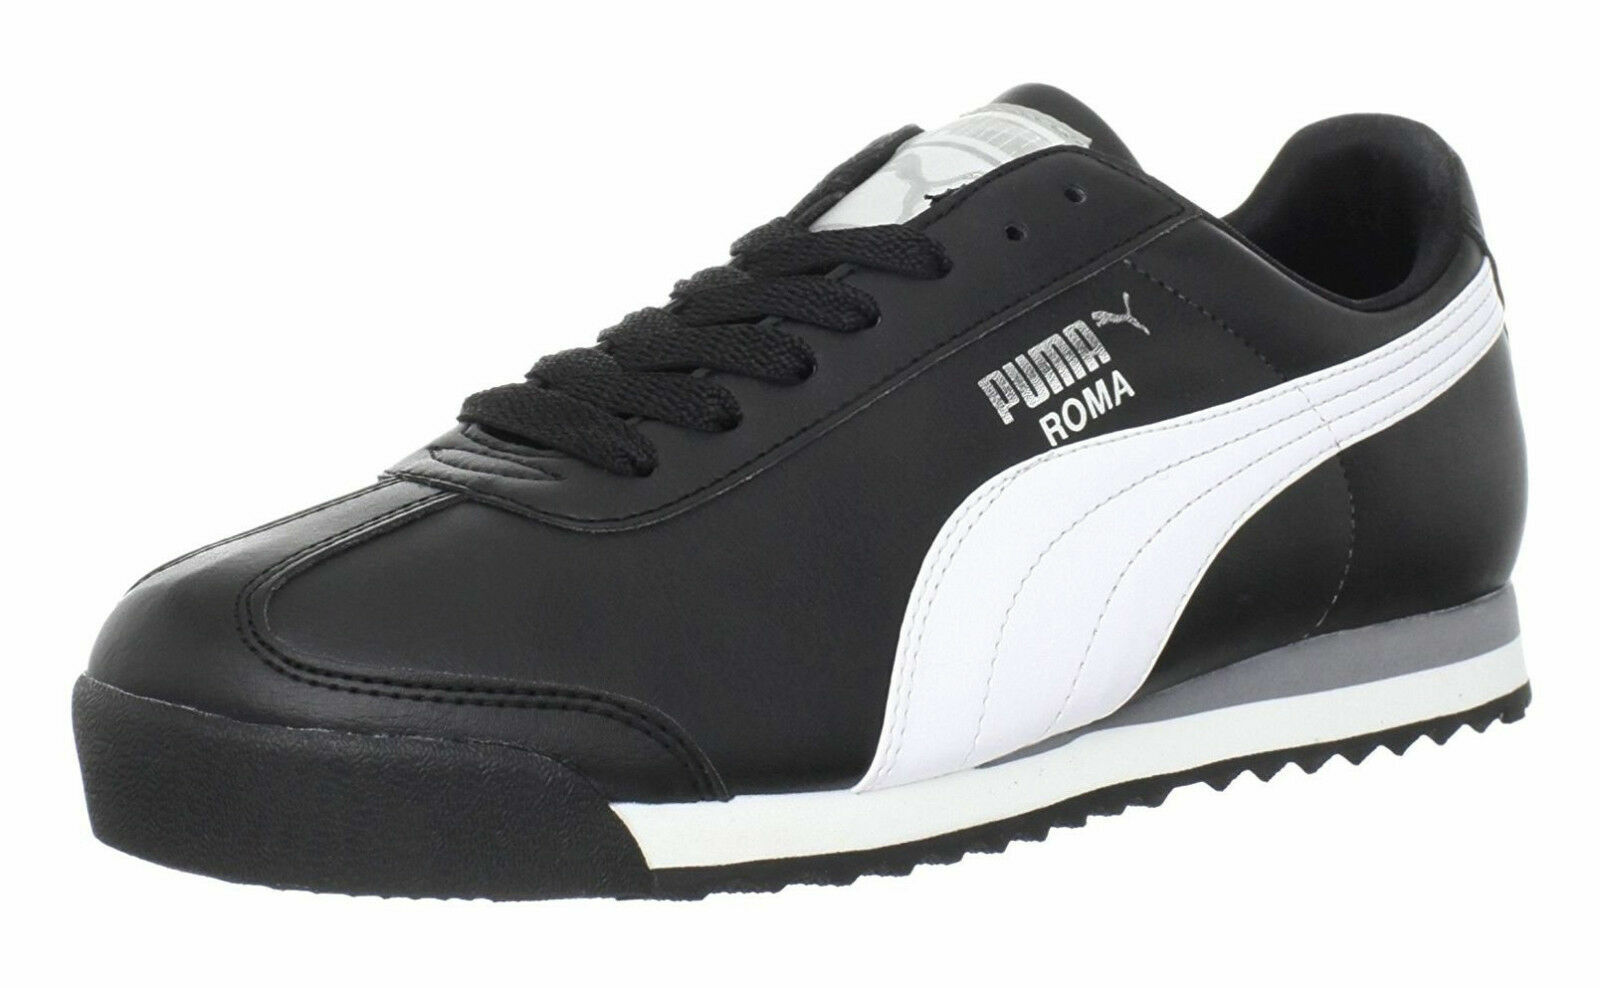 Puma Popular shop is the lowest price challenge Roma quality assurance Classic Black White Sneakers Running Mens Sho Trainers